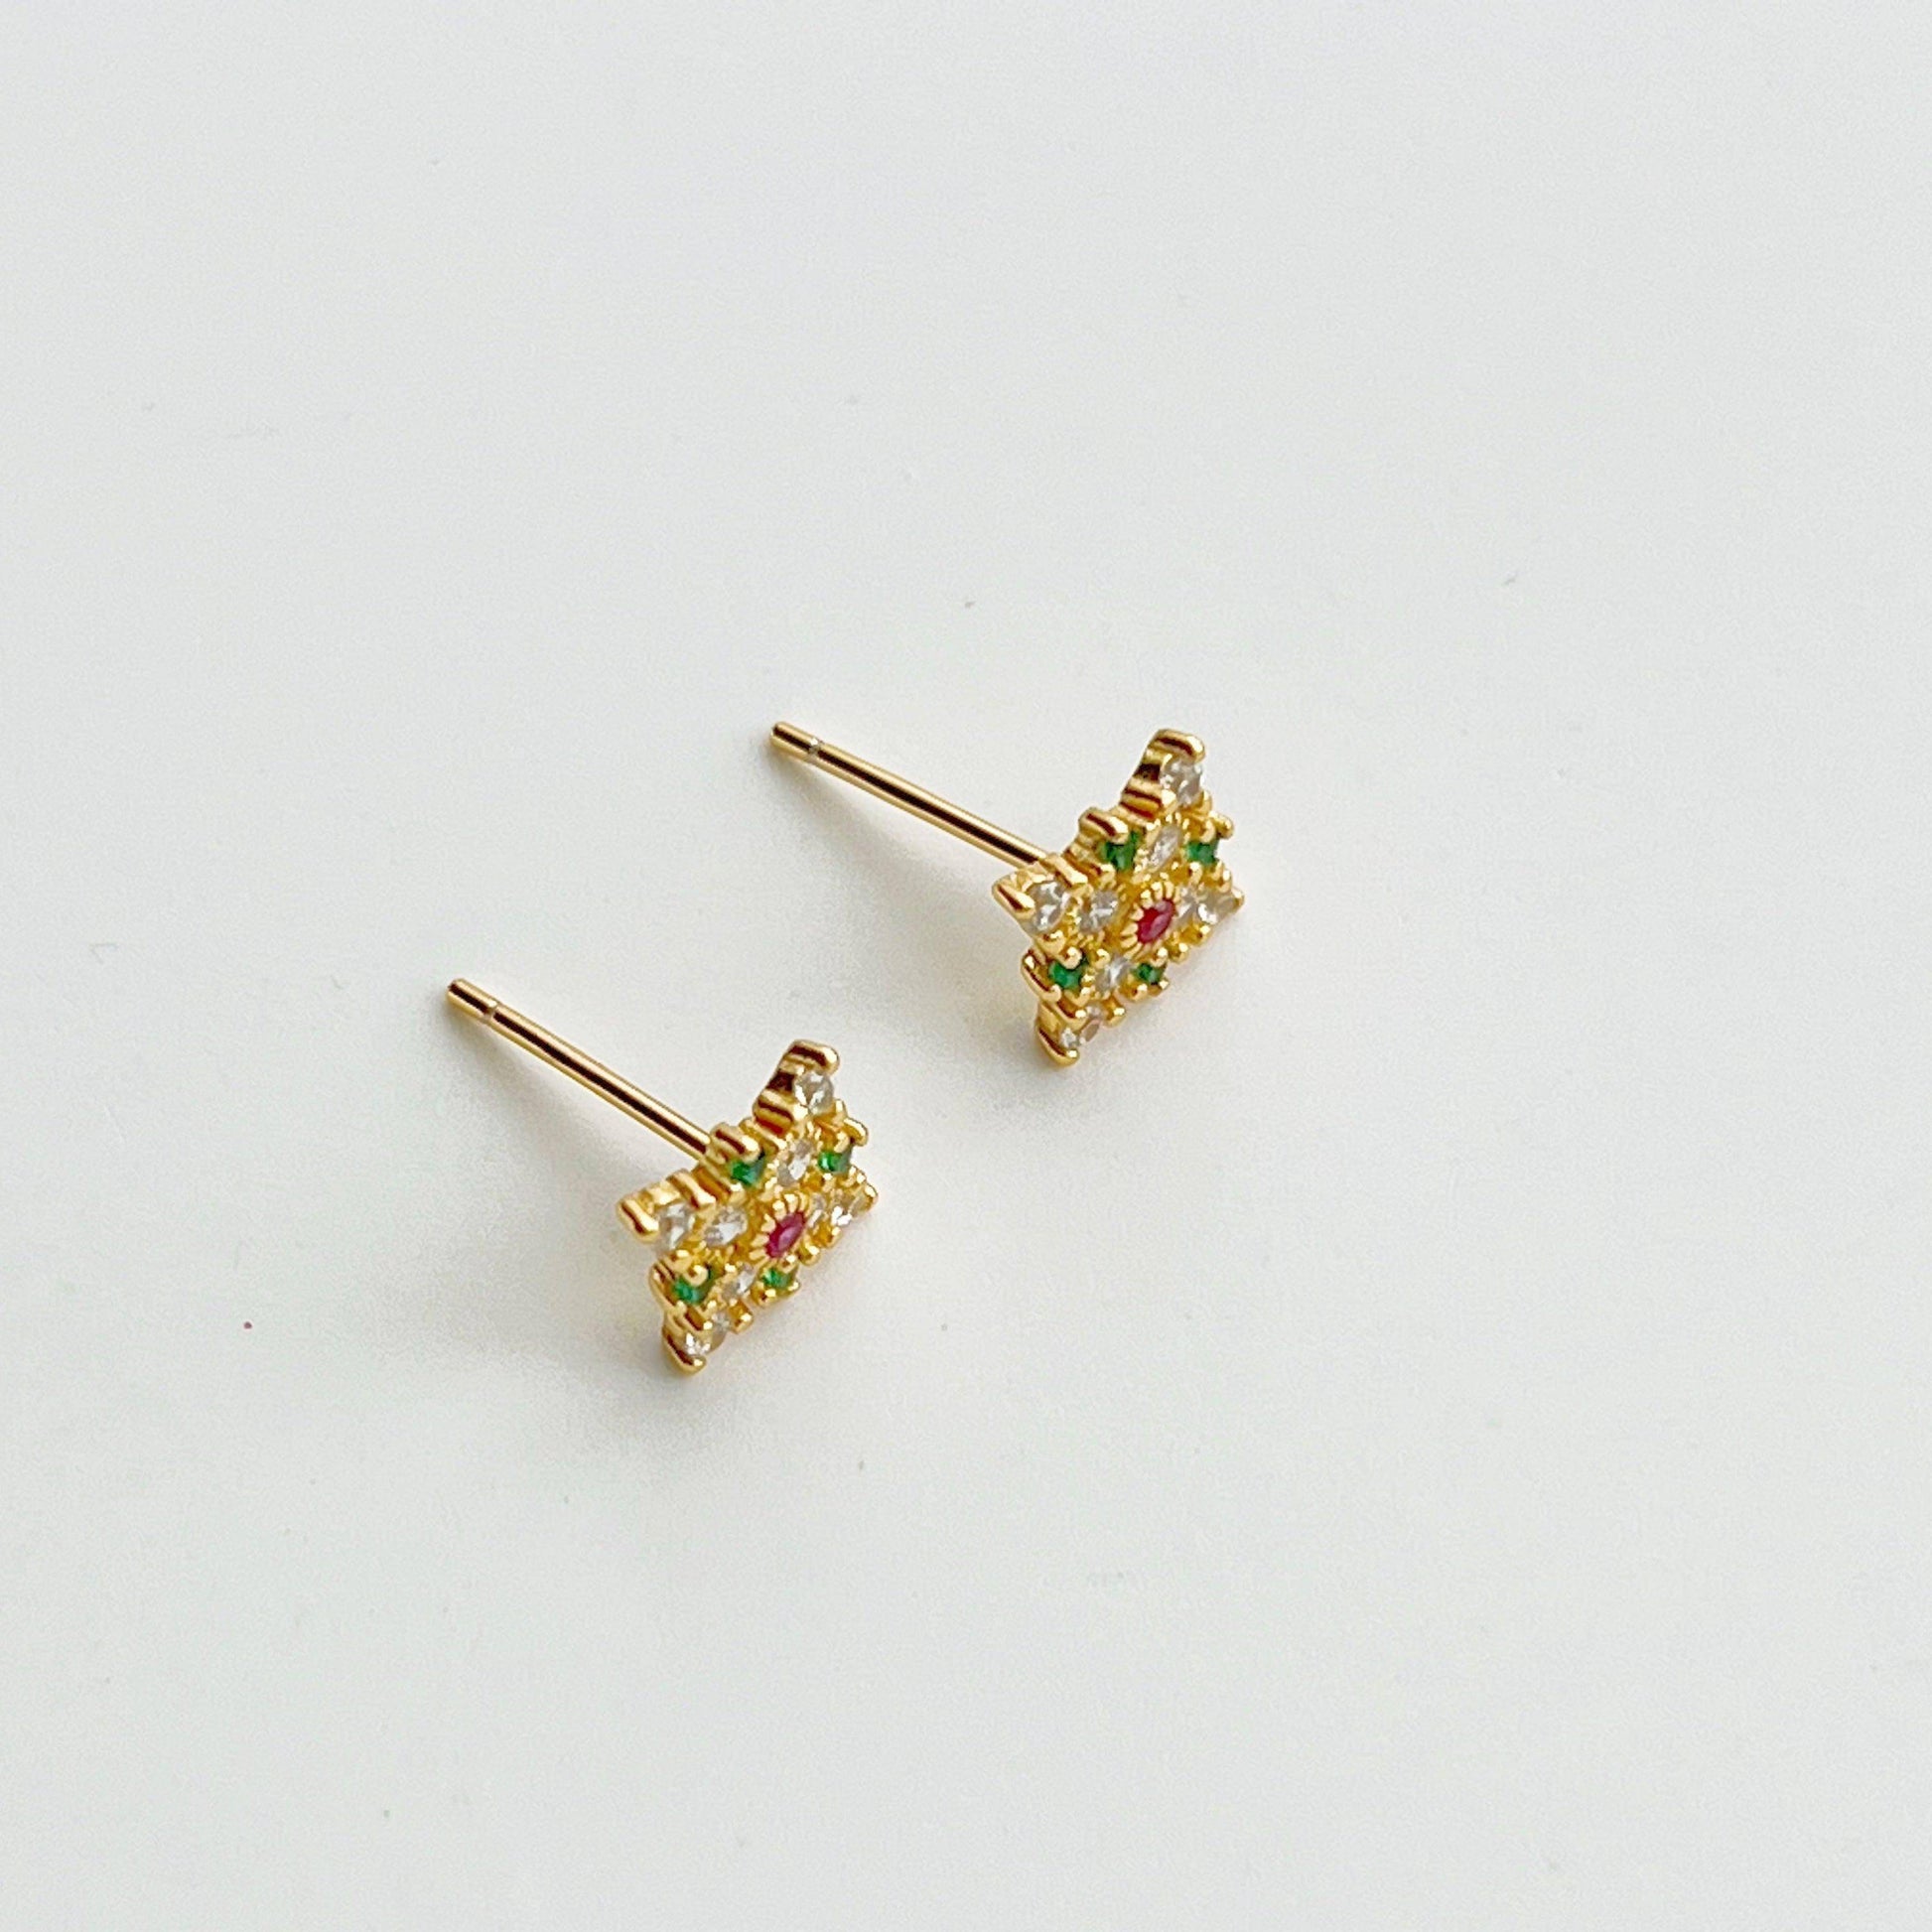 Emerald Stars Earrings - Tiny Size Green and Pink Crystal Sterling Silver Stud Earrings-Ninaouity